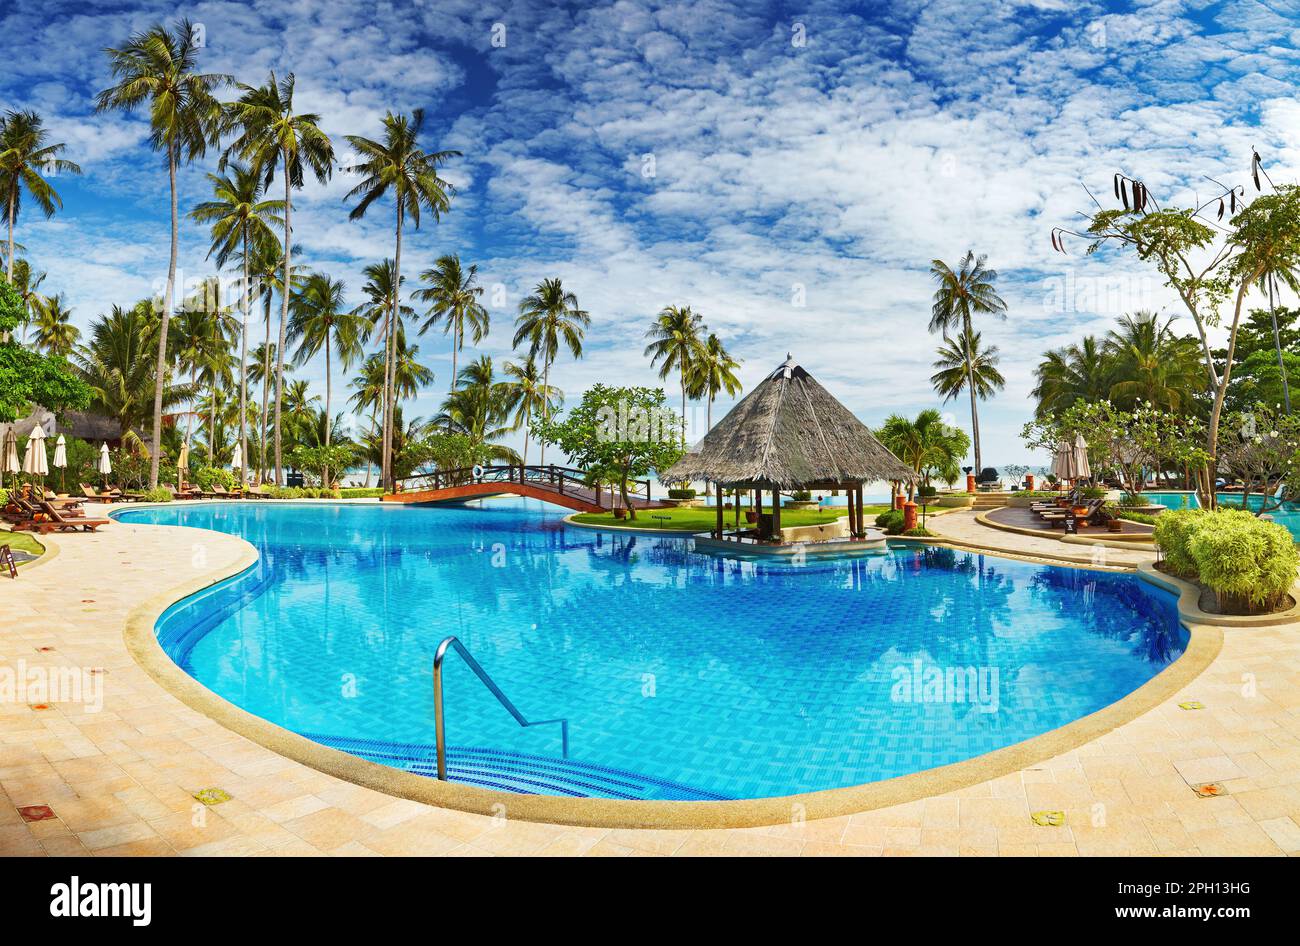 Recreation area with swimming pool on the tropical beach Stock Photo